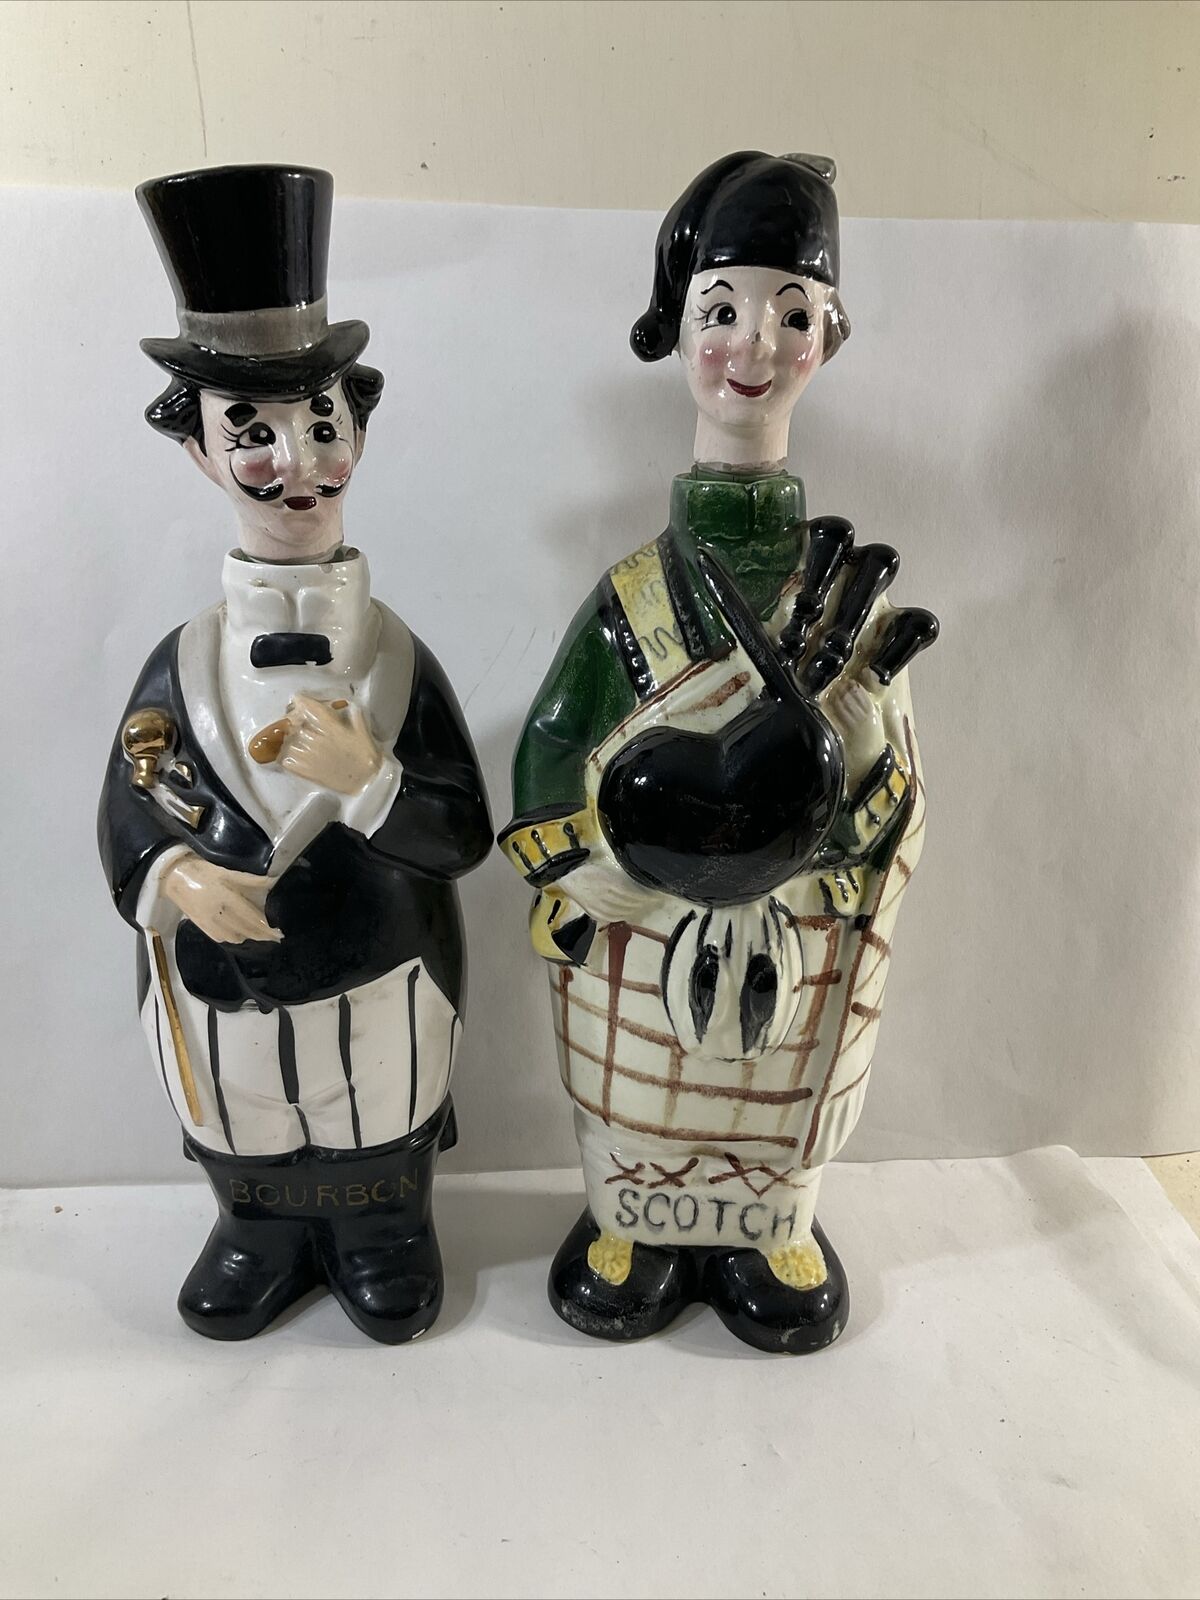 Vintage Swank Member Bagpiper Scotch and Bourbon Decanters Set of 2